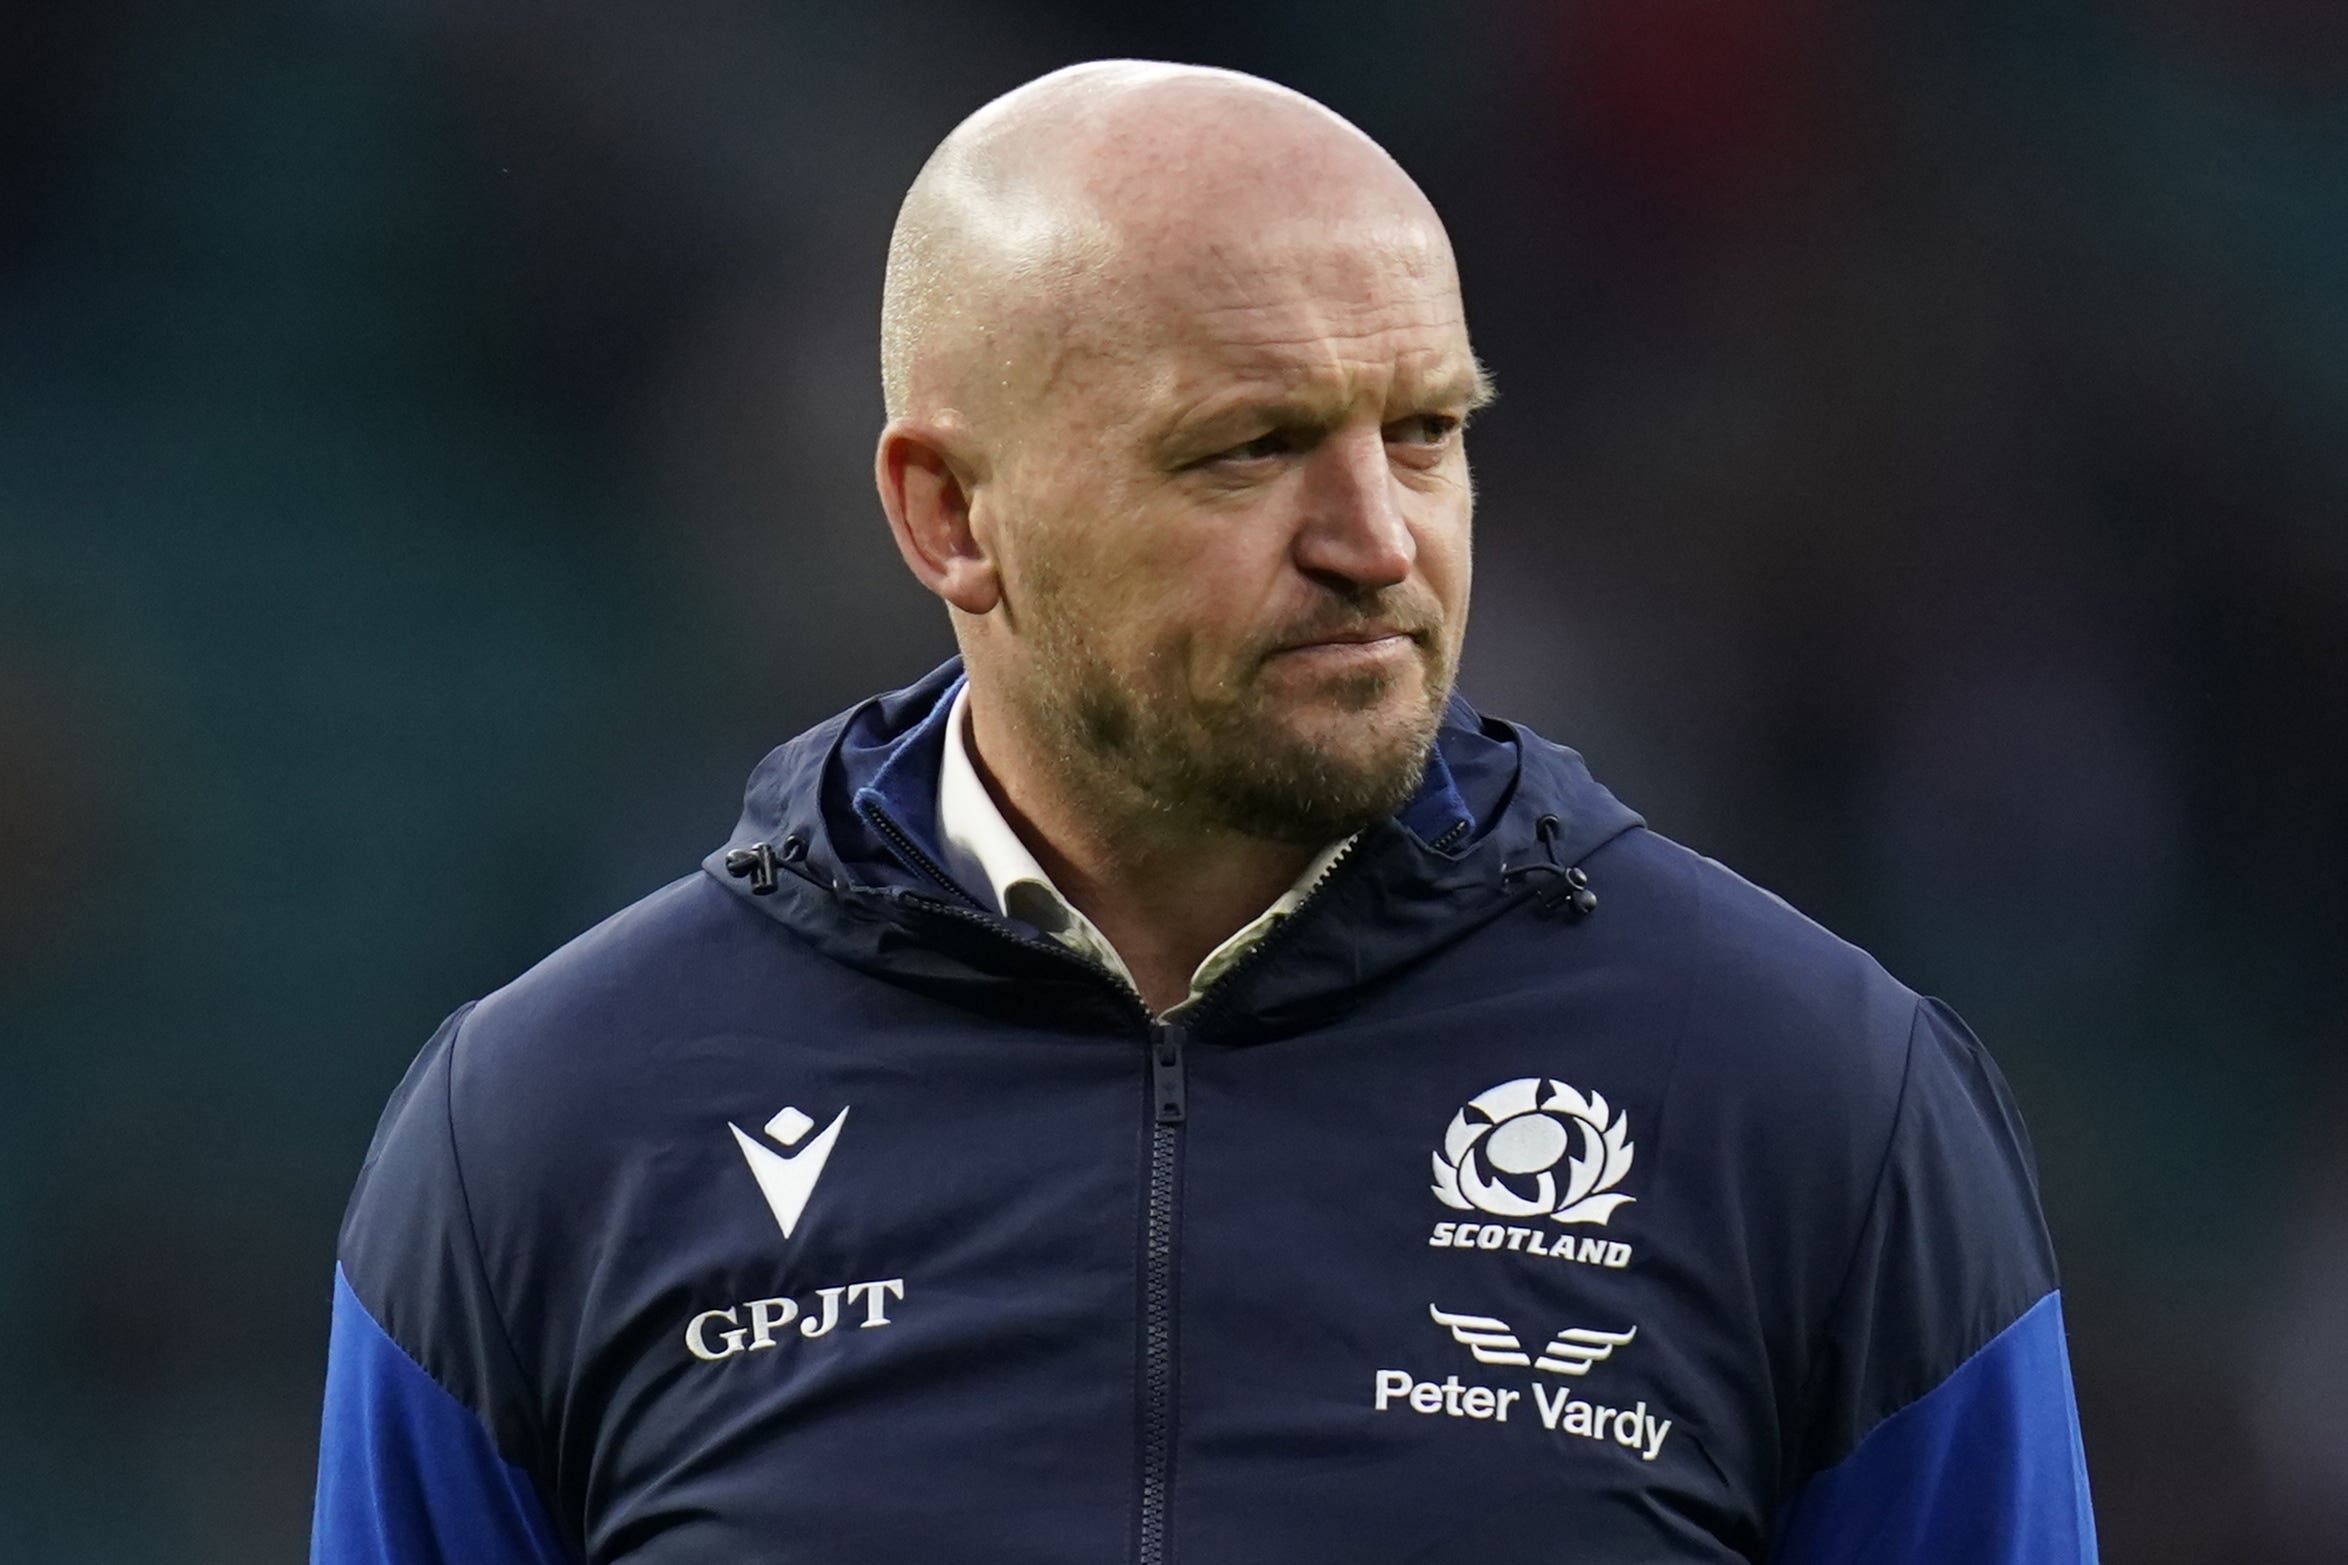 Gregor Townsend was heartened by his team’s strong fightback (Andrew Matthews/PA)